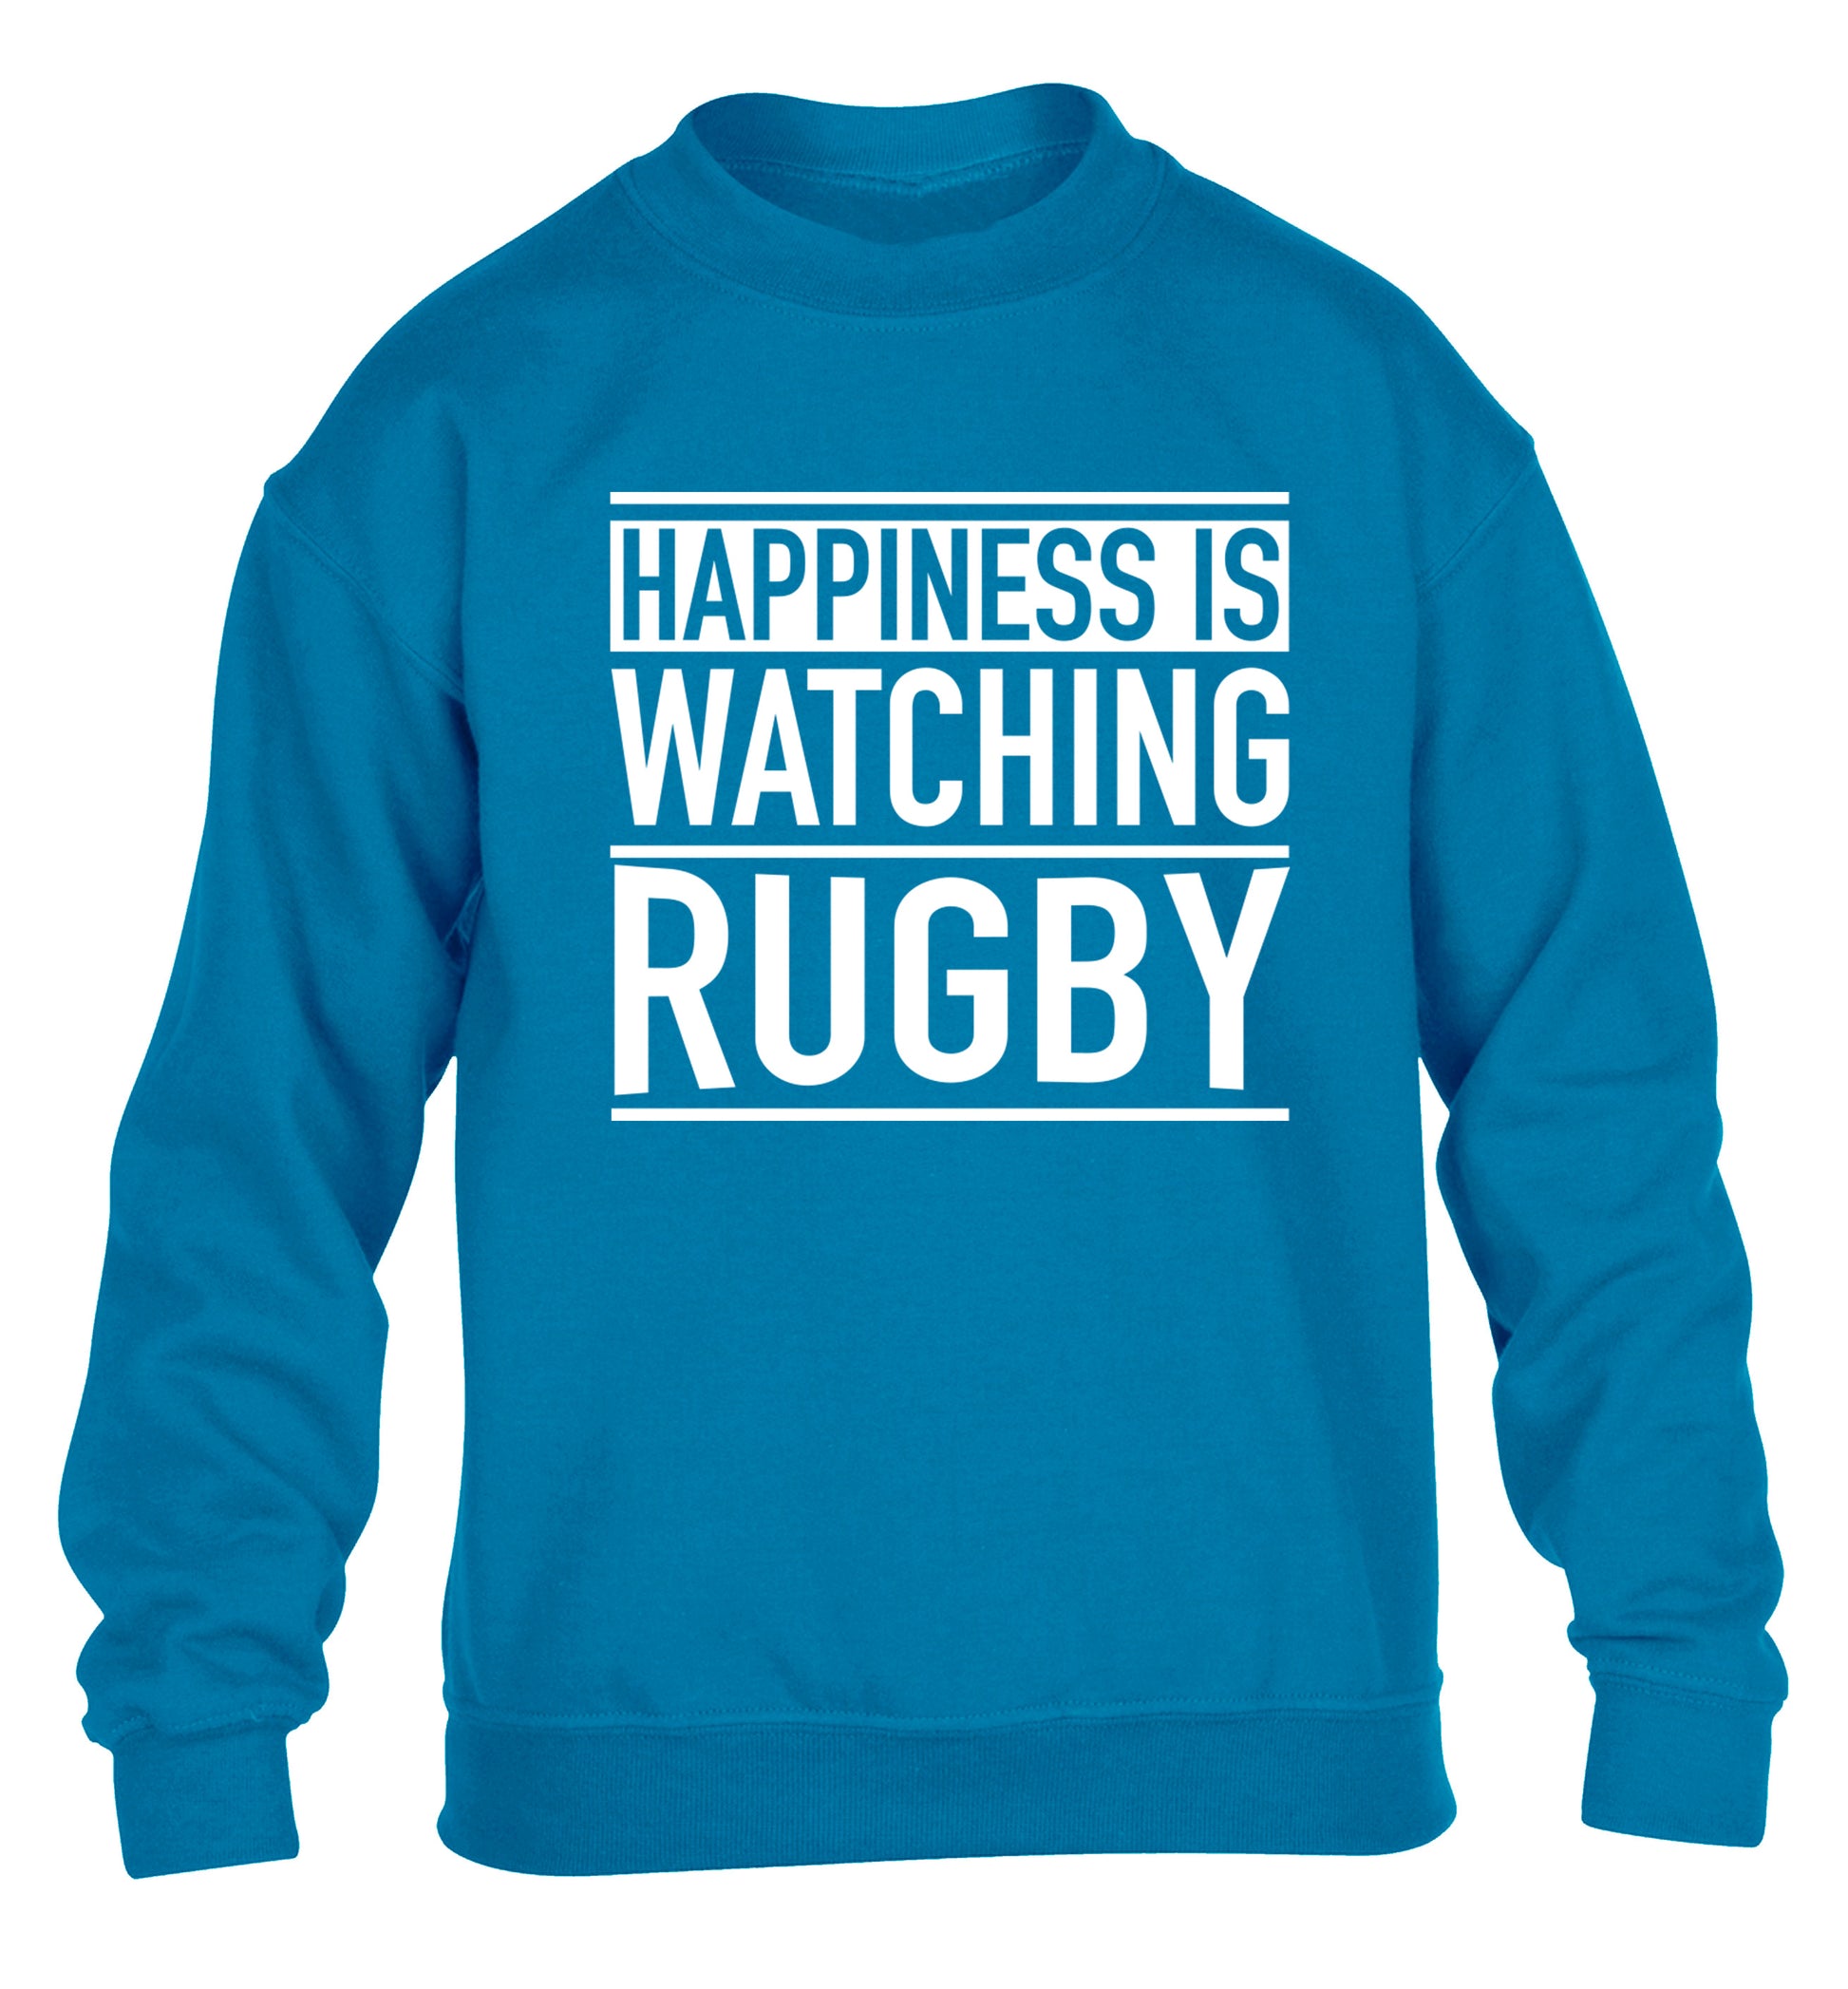 Happiness is watching rugby children's blue sweater 12-13 Years